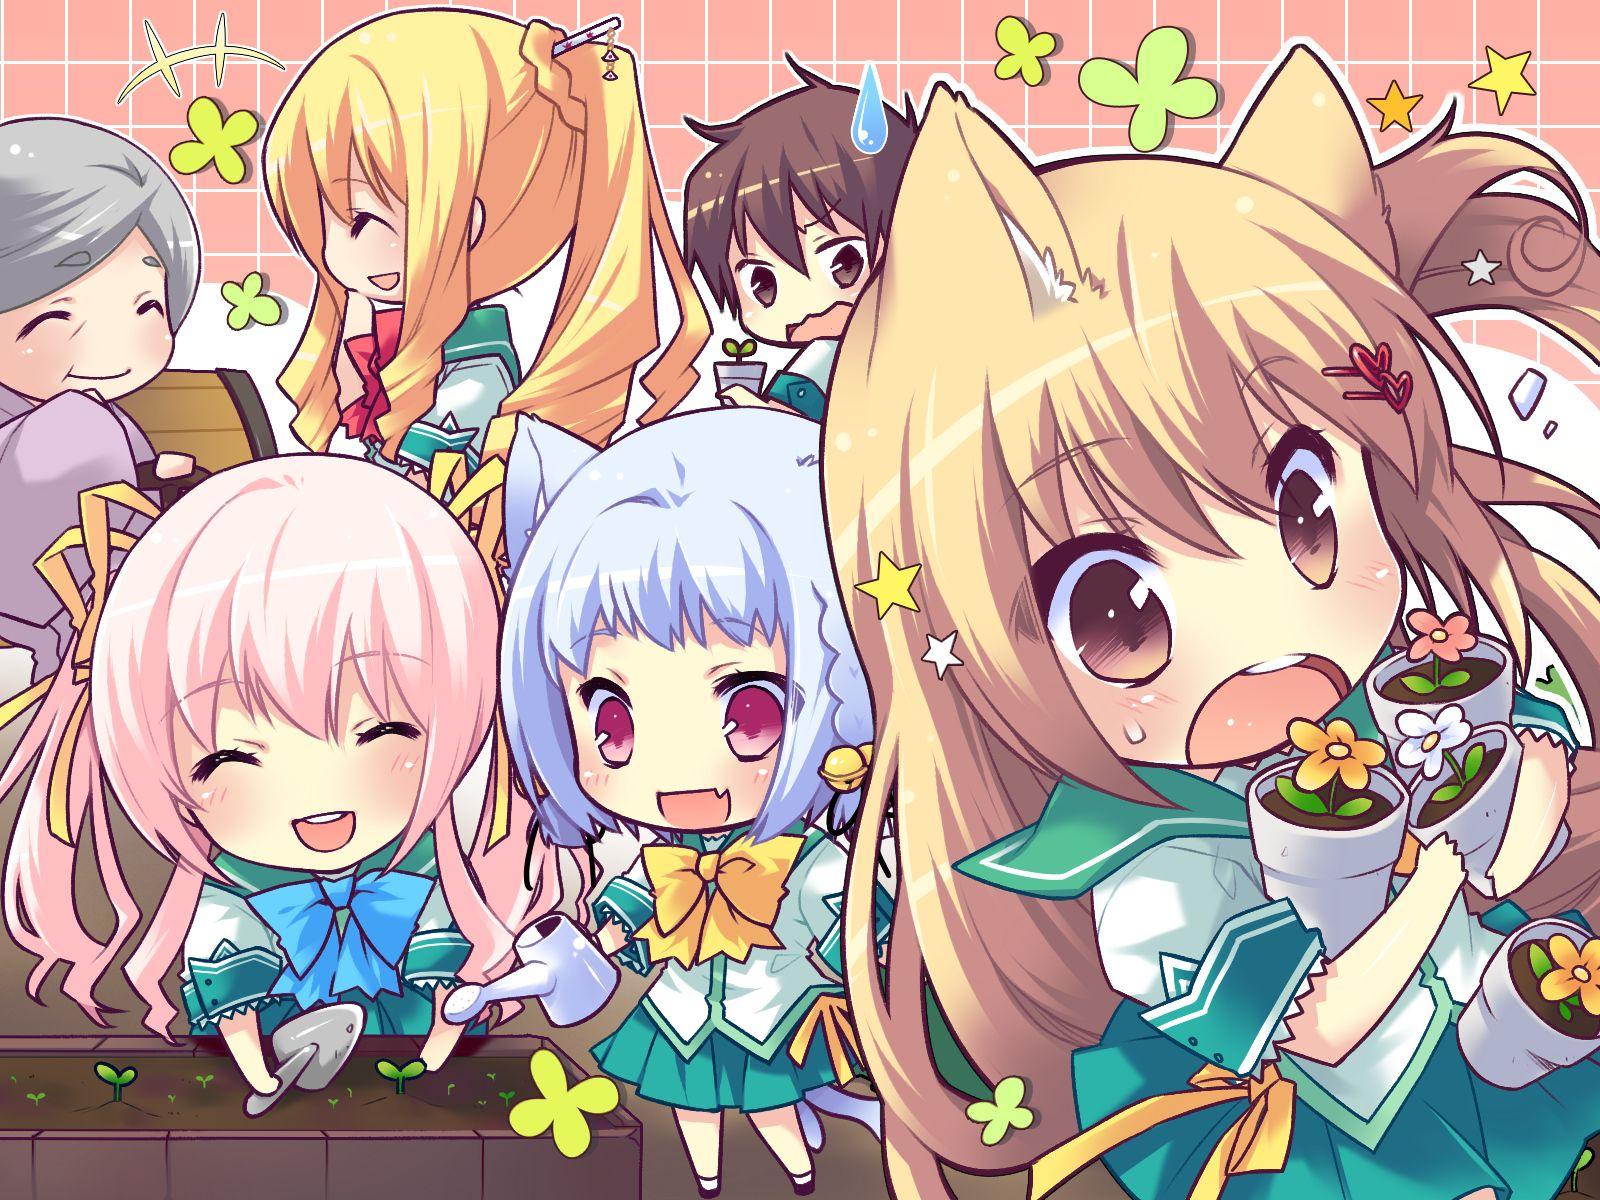 undefined Anime Chibi Wallpaper (46 Wallpaper). Adorable